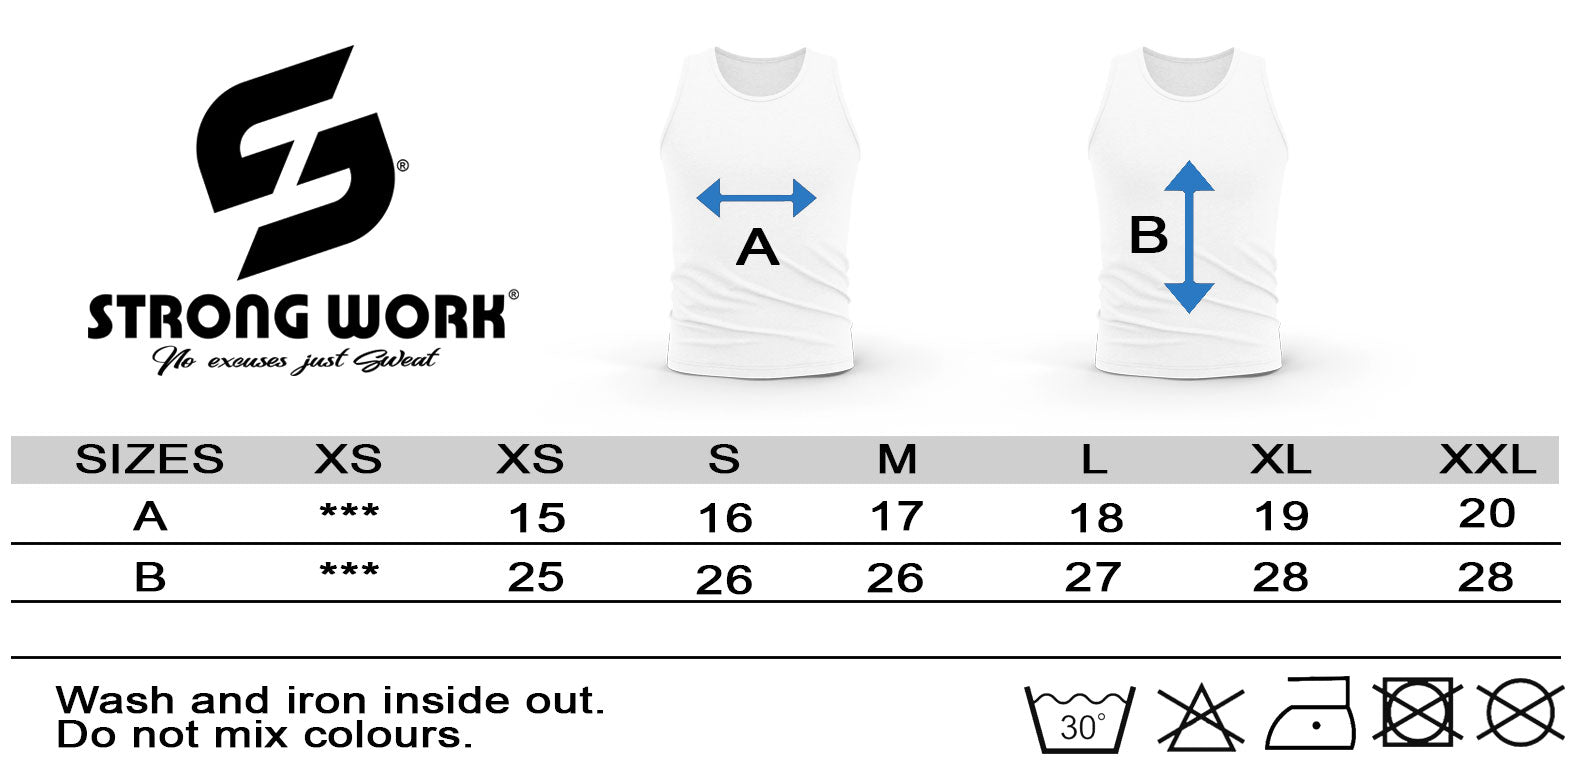 STRONG WORK RUNNING SIZE GUIDE - SUSTAINABLE RUNNING TANK TOP FOR WOMEN